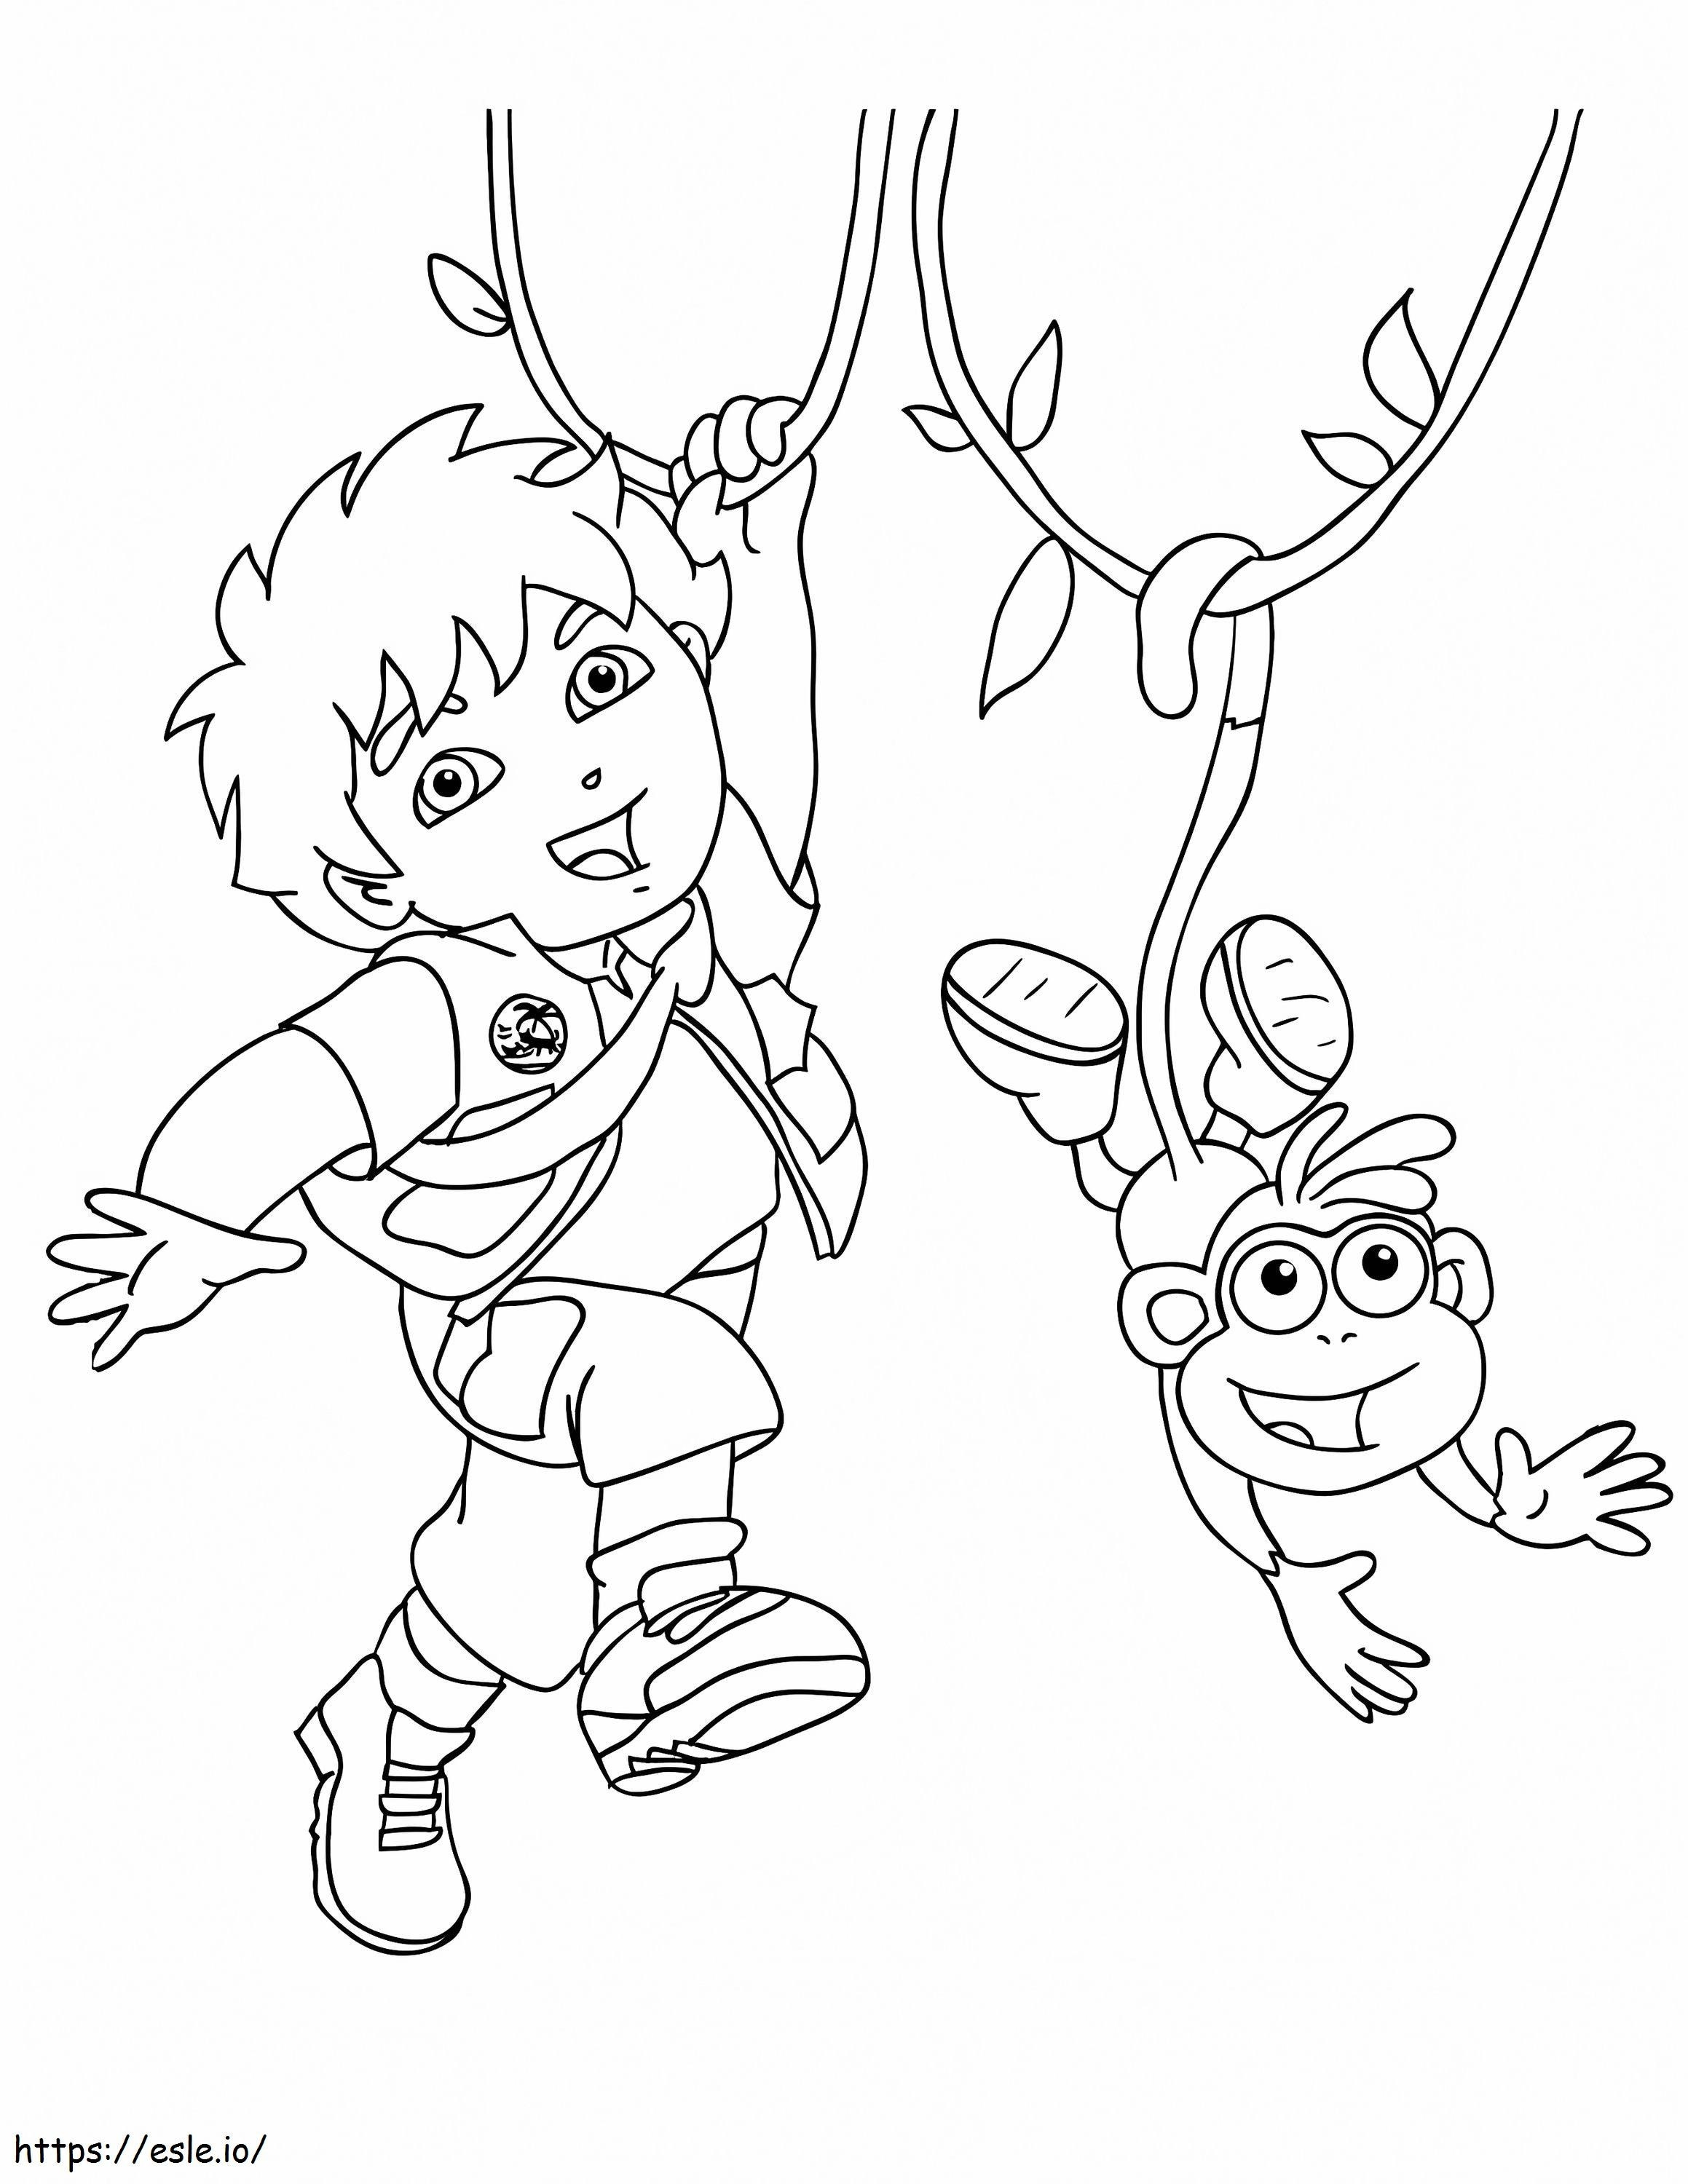 Diego And Monkey coloring page